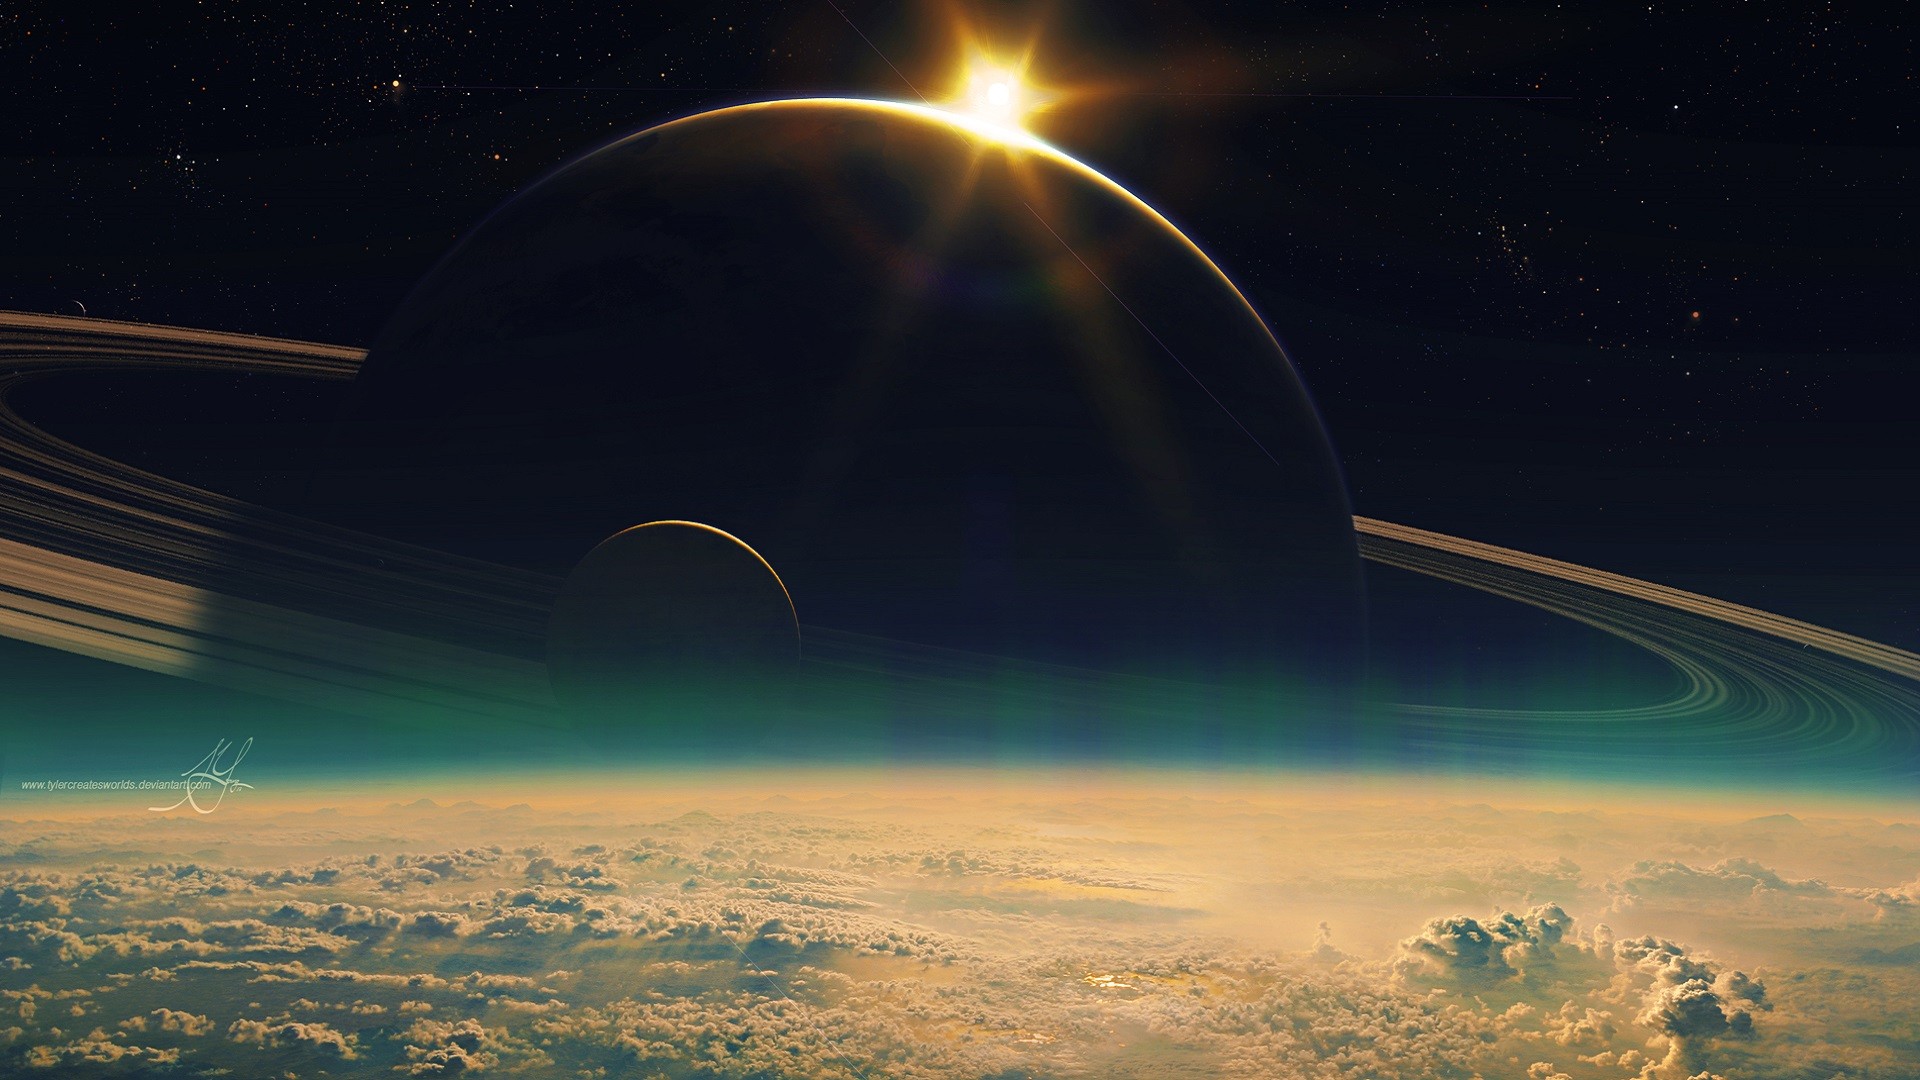 1080p Space wallpaper ·① Download free High Resolution ...